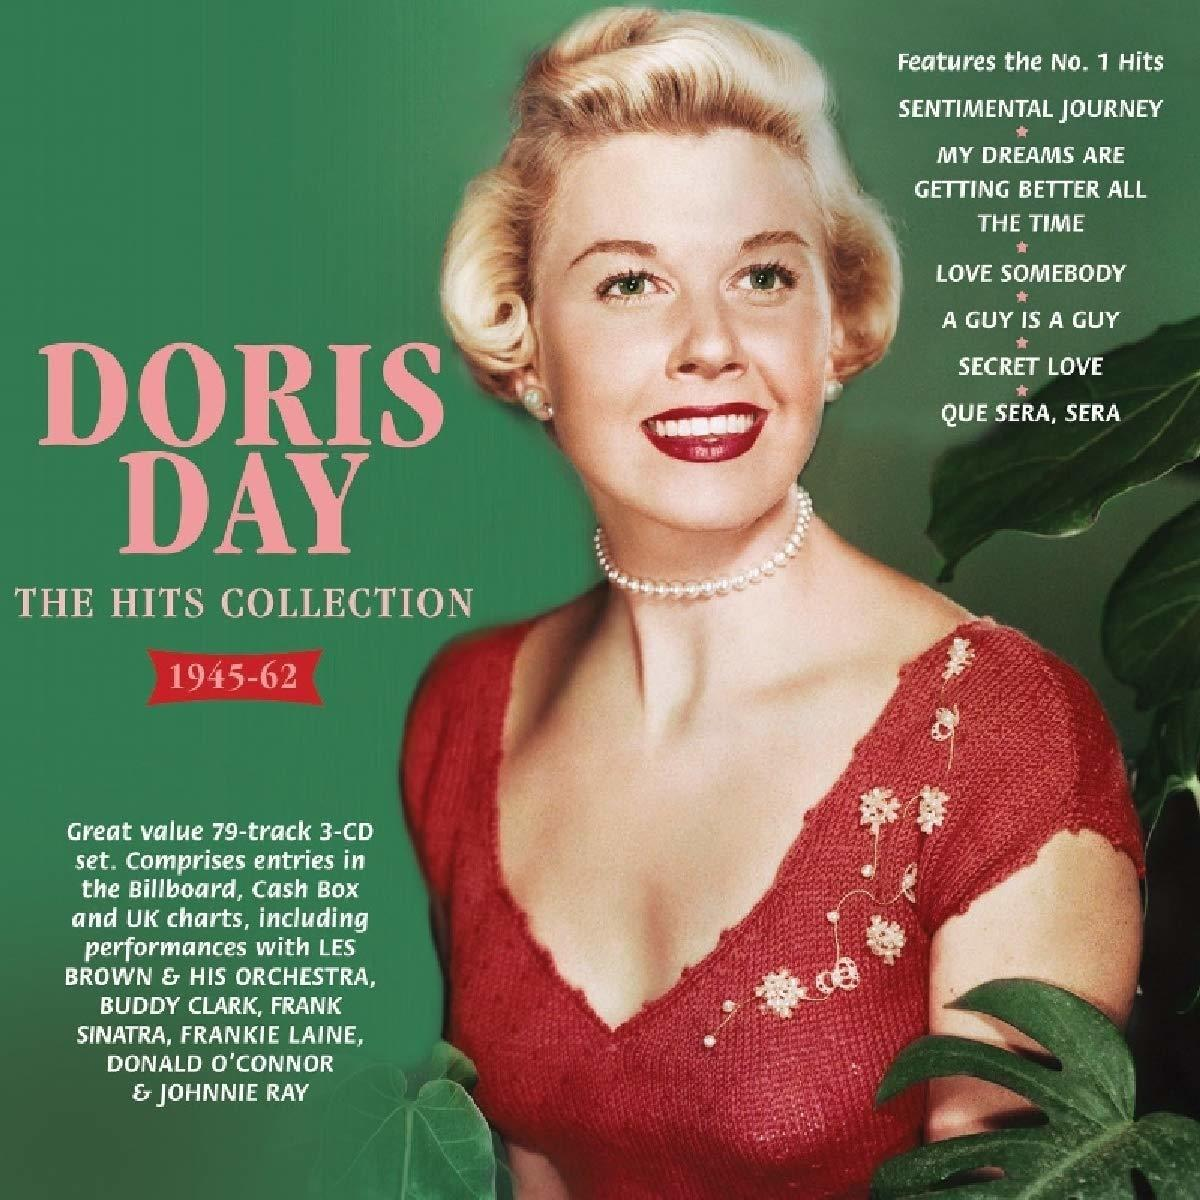 Doris Day - THE HITS (CD) COLLECTION 1945-1962 